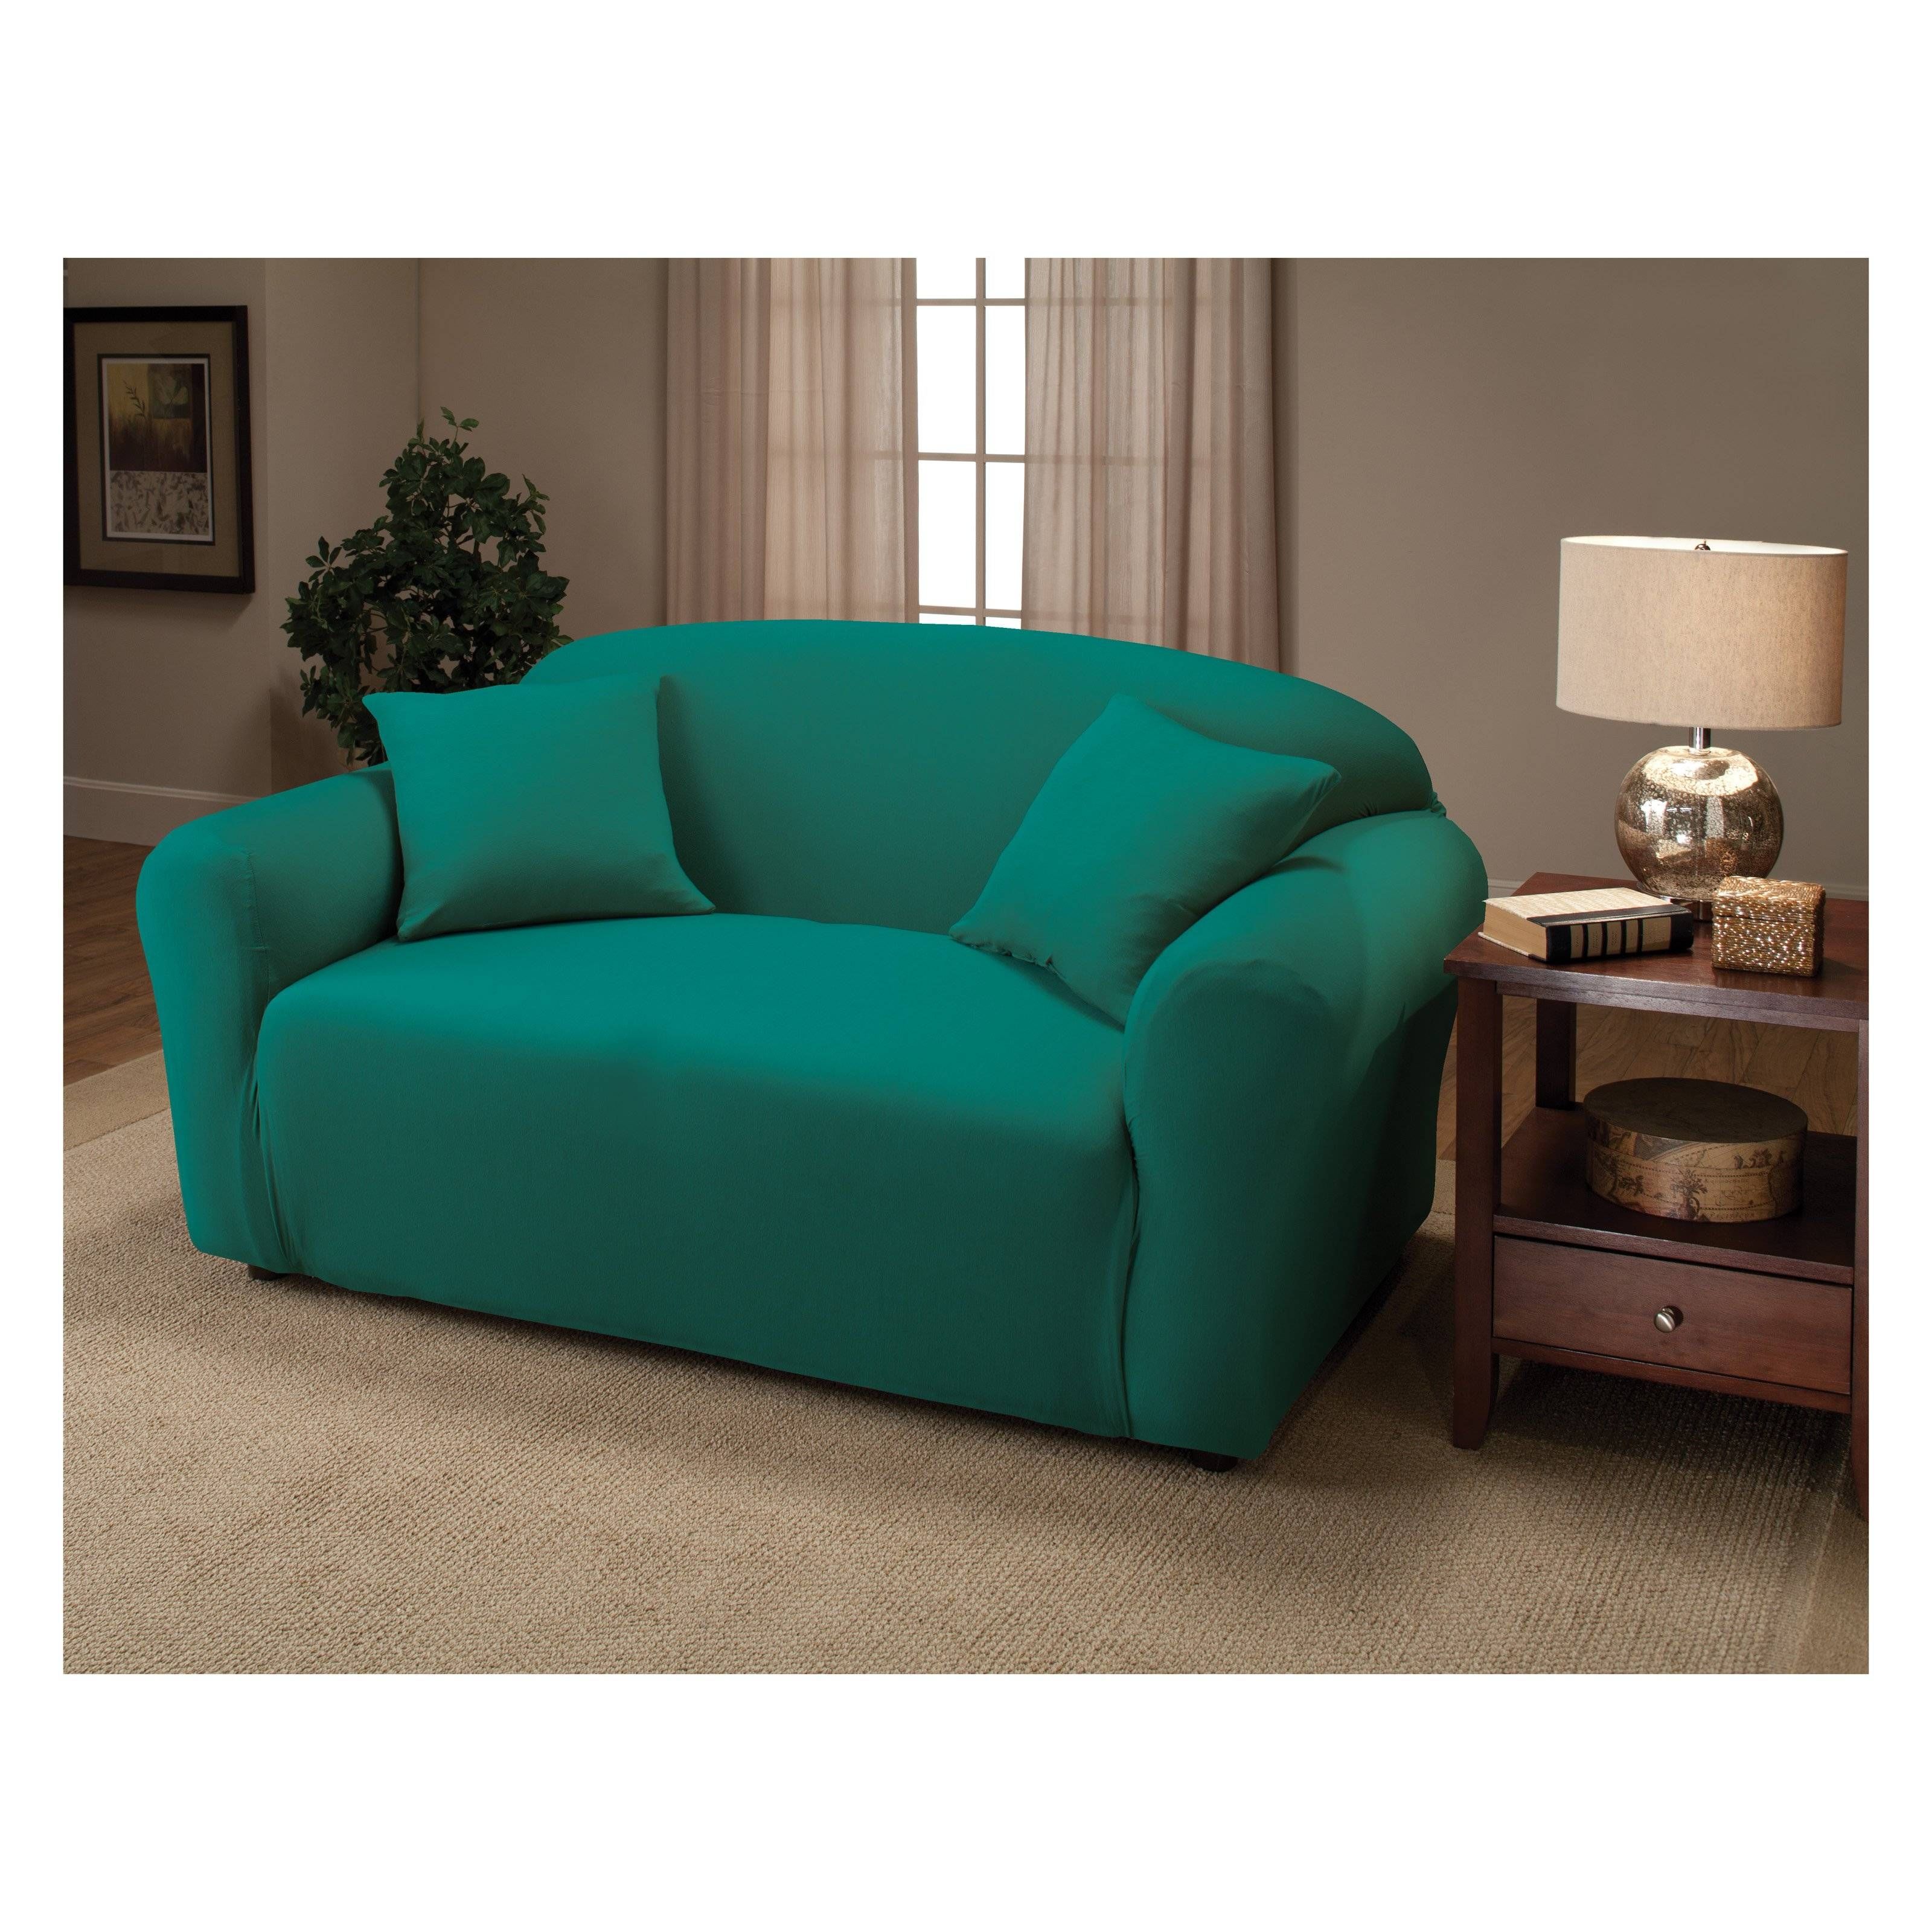 30 Collection of Teal Sofa Slipcovers